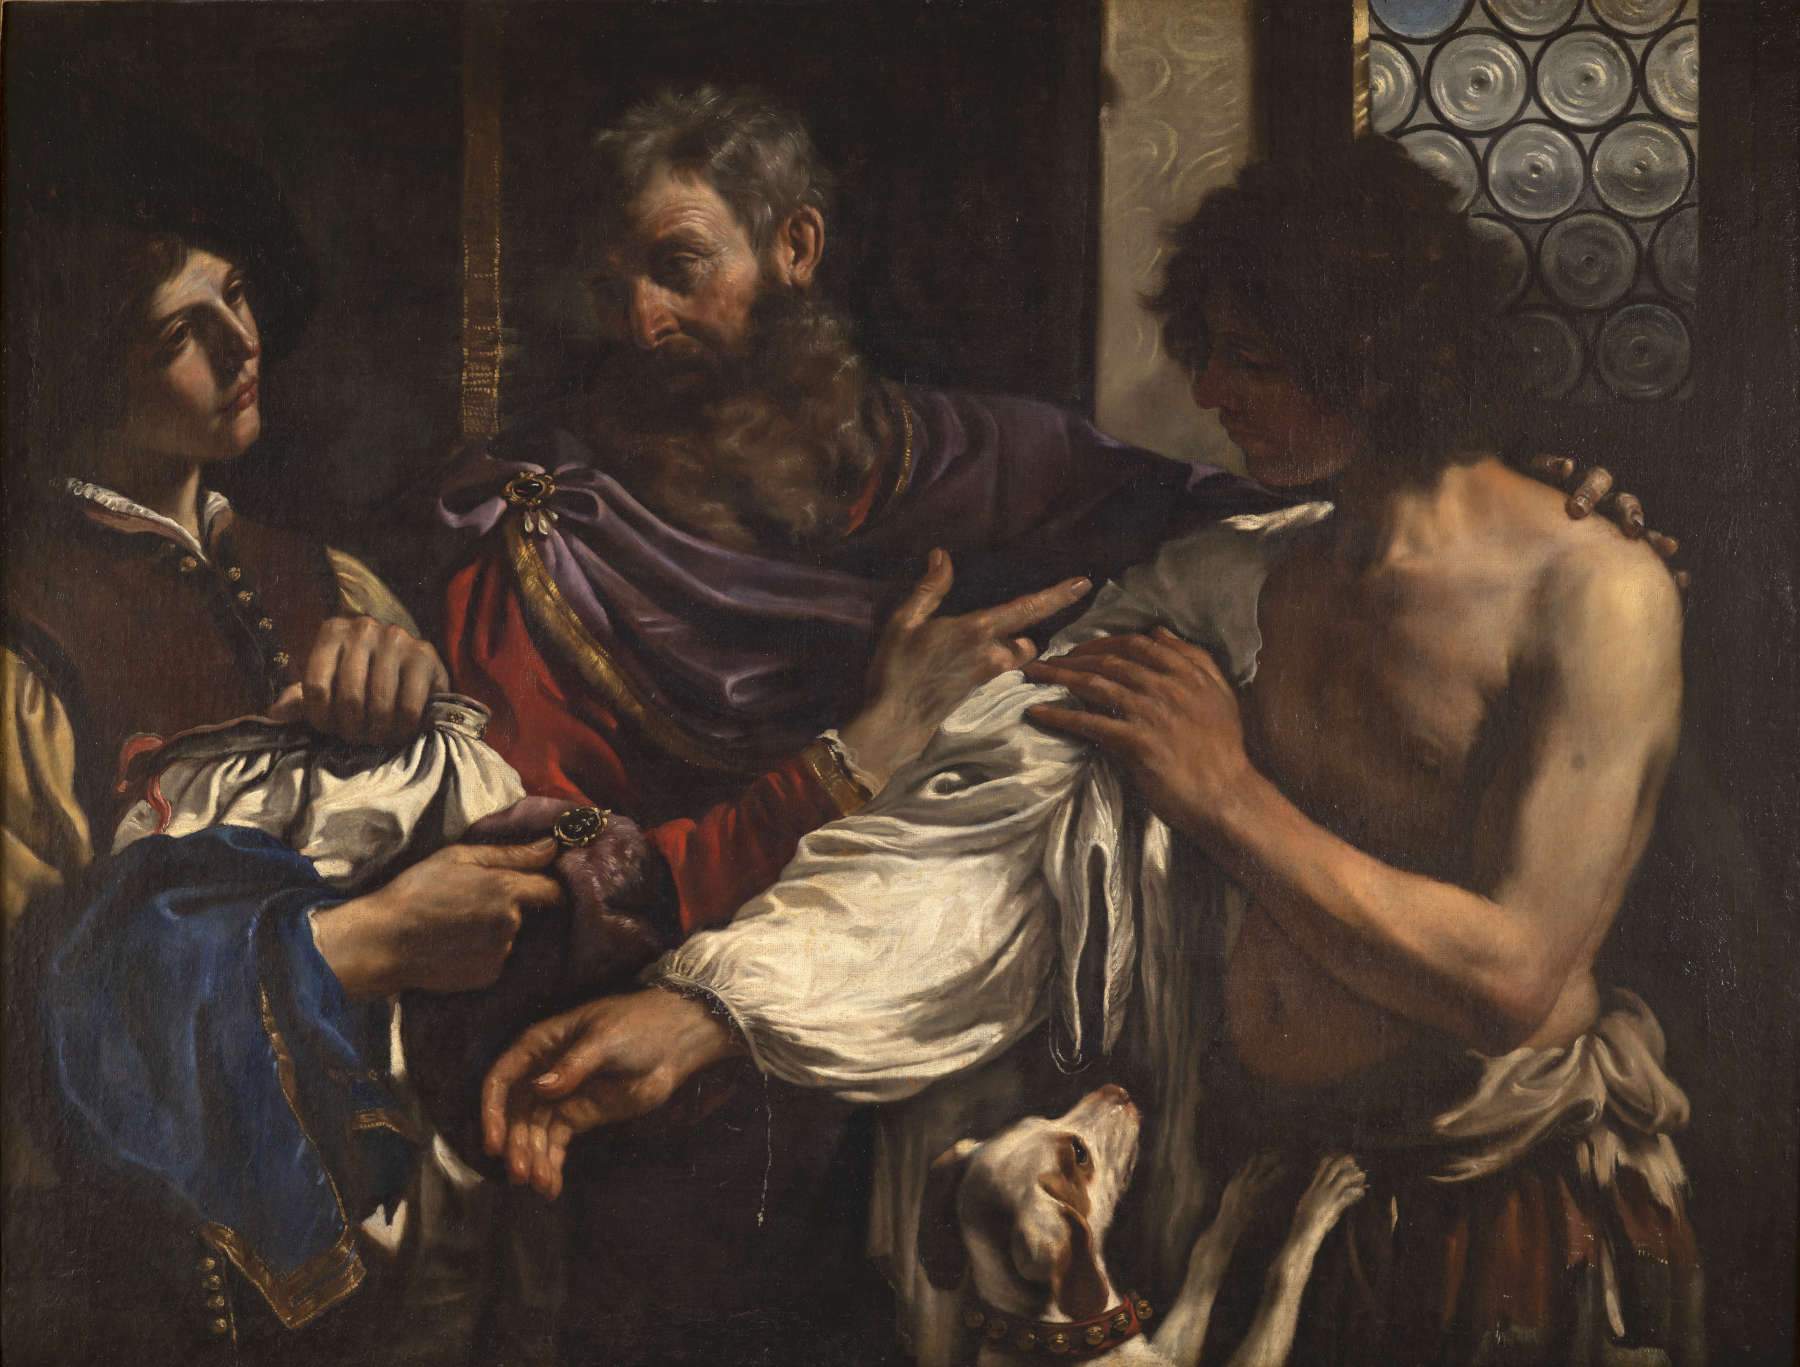 Turin, at the Royal Museums the major exhibition on Guercino with international loans